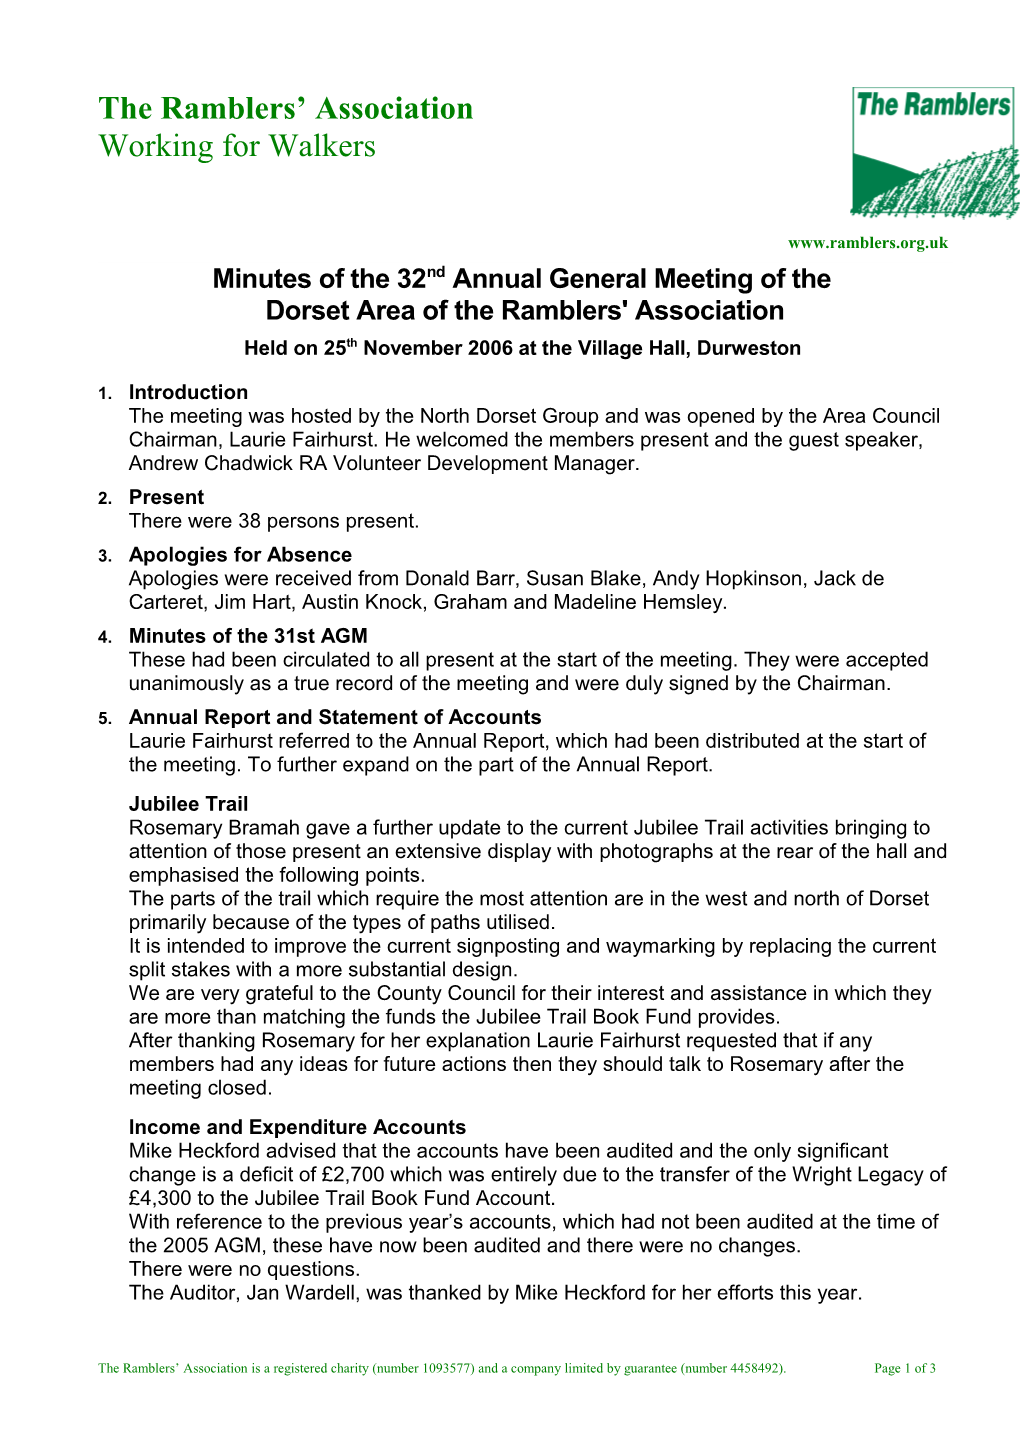 Minutes of the 32Nd Annual General Meeting of the Dorset Area of the Ramblers' Association